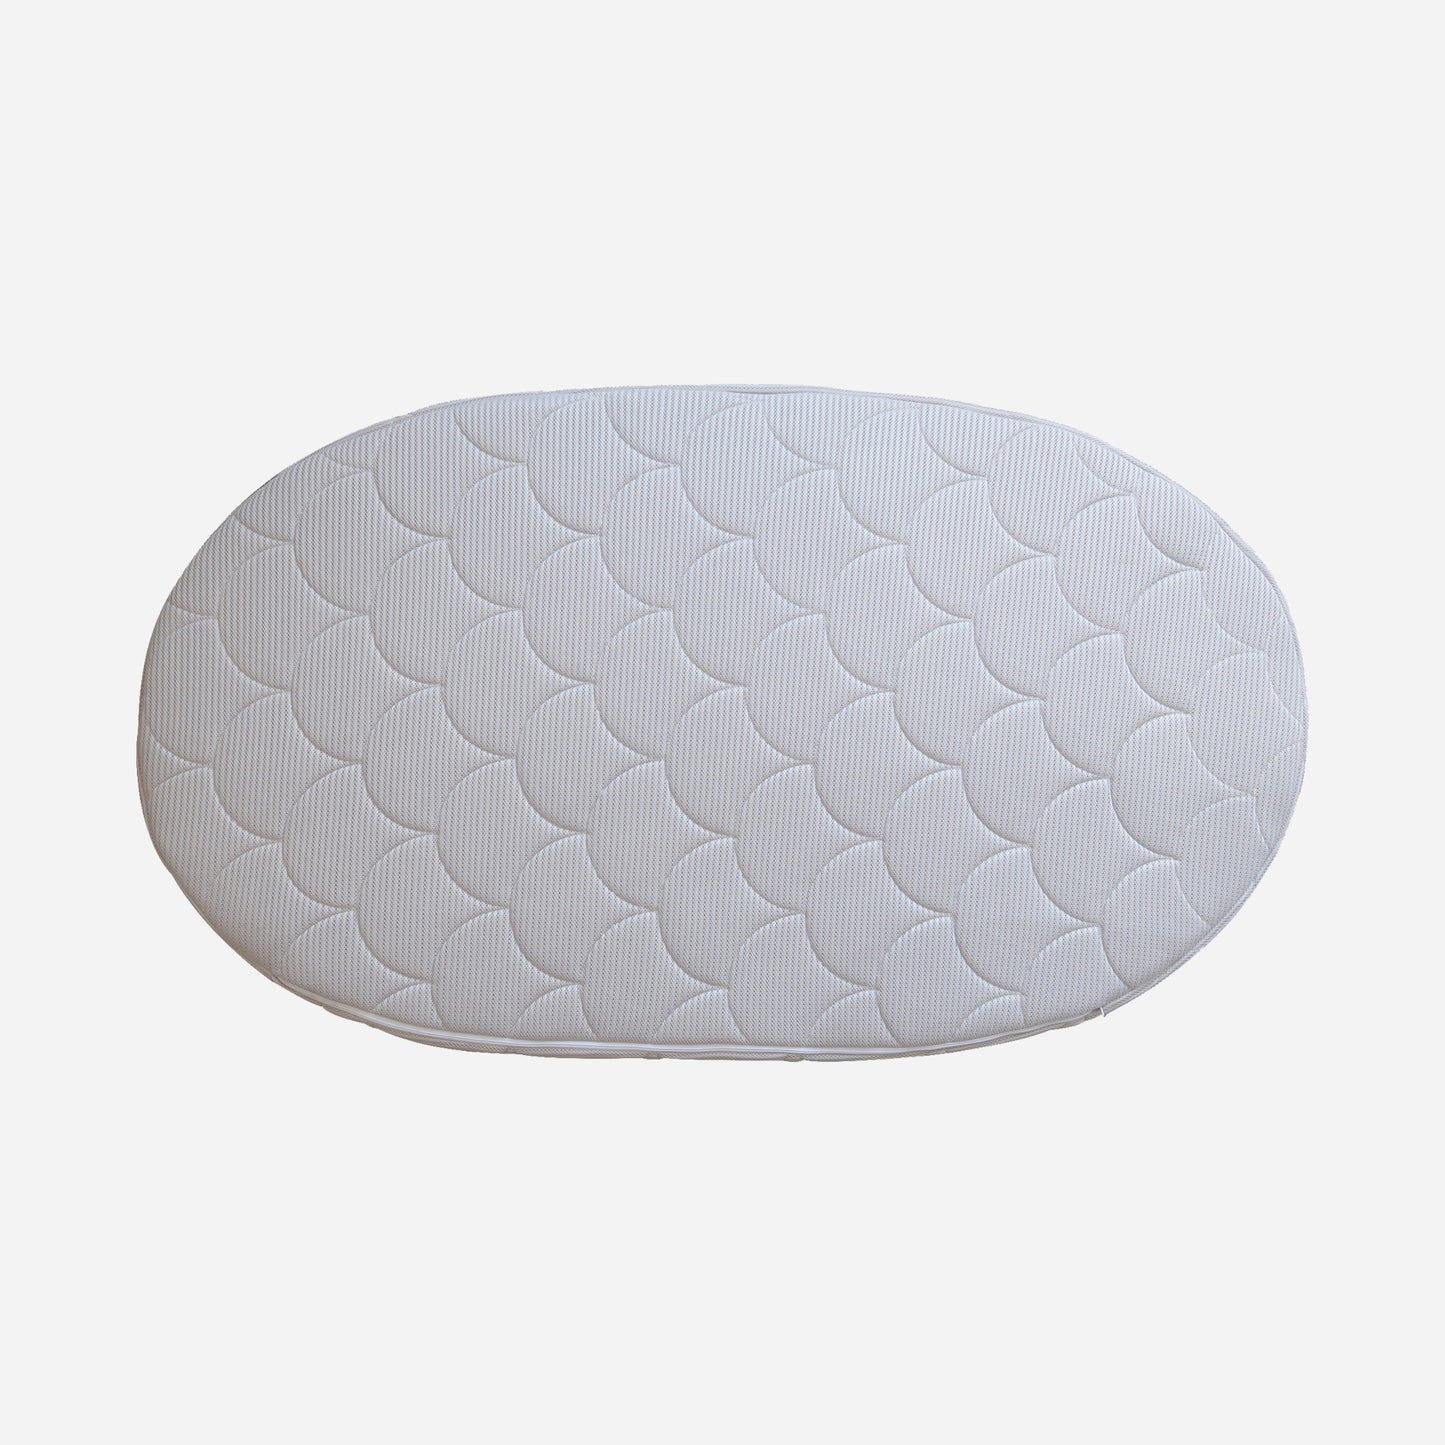 airnest Mattress- Oval Pre order for mid Sept Delivery